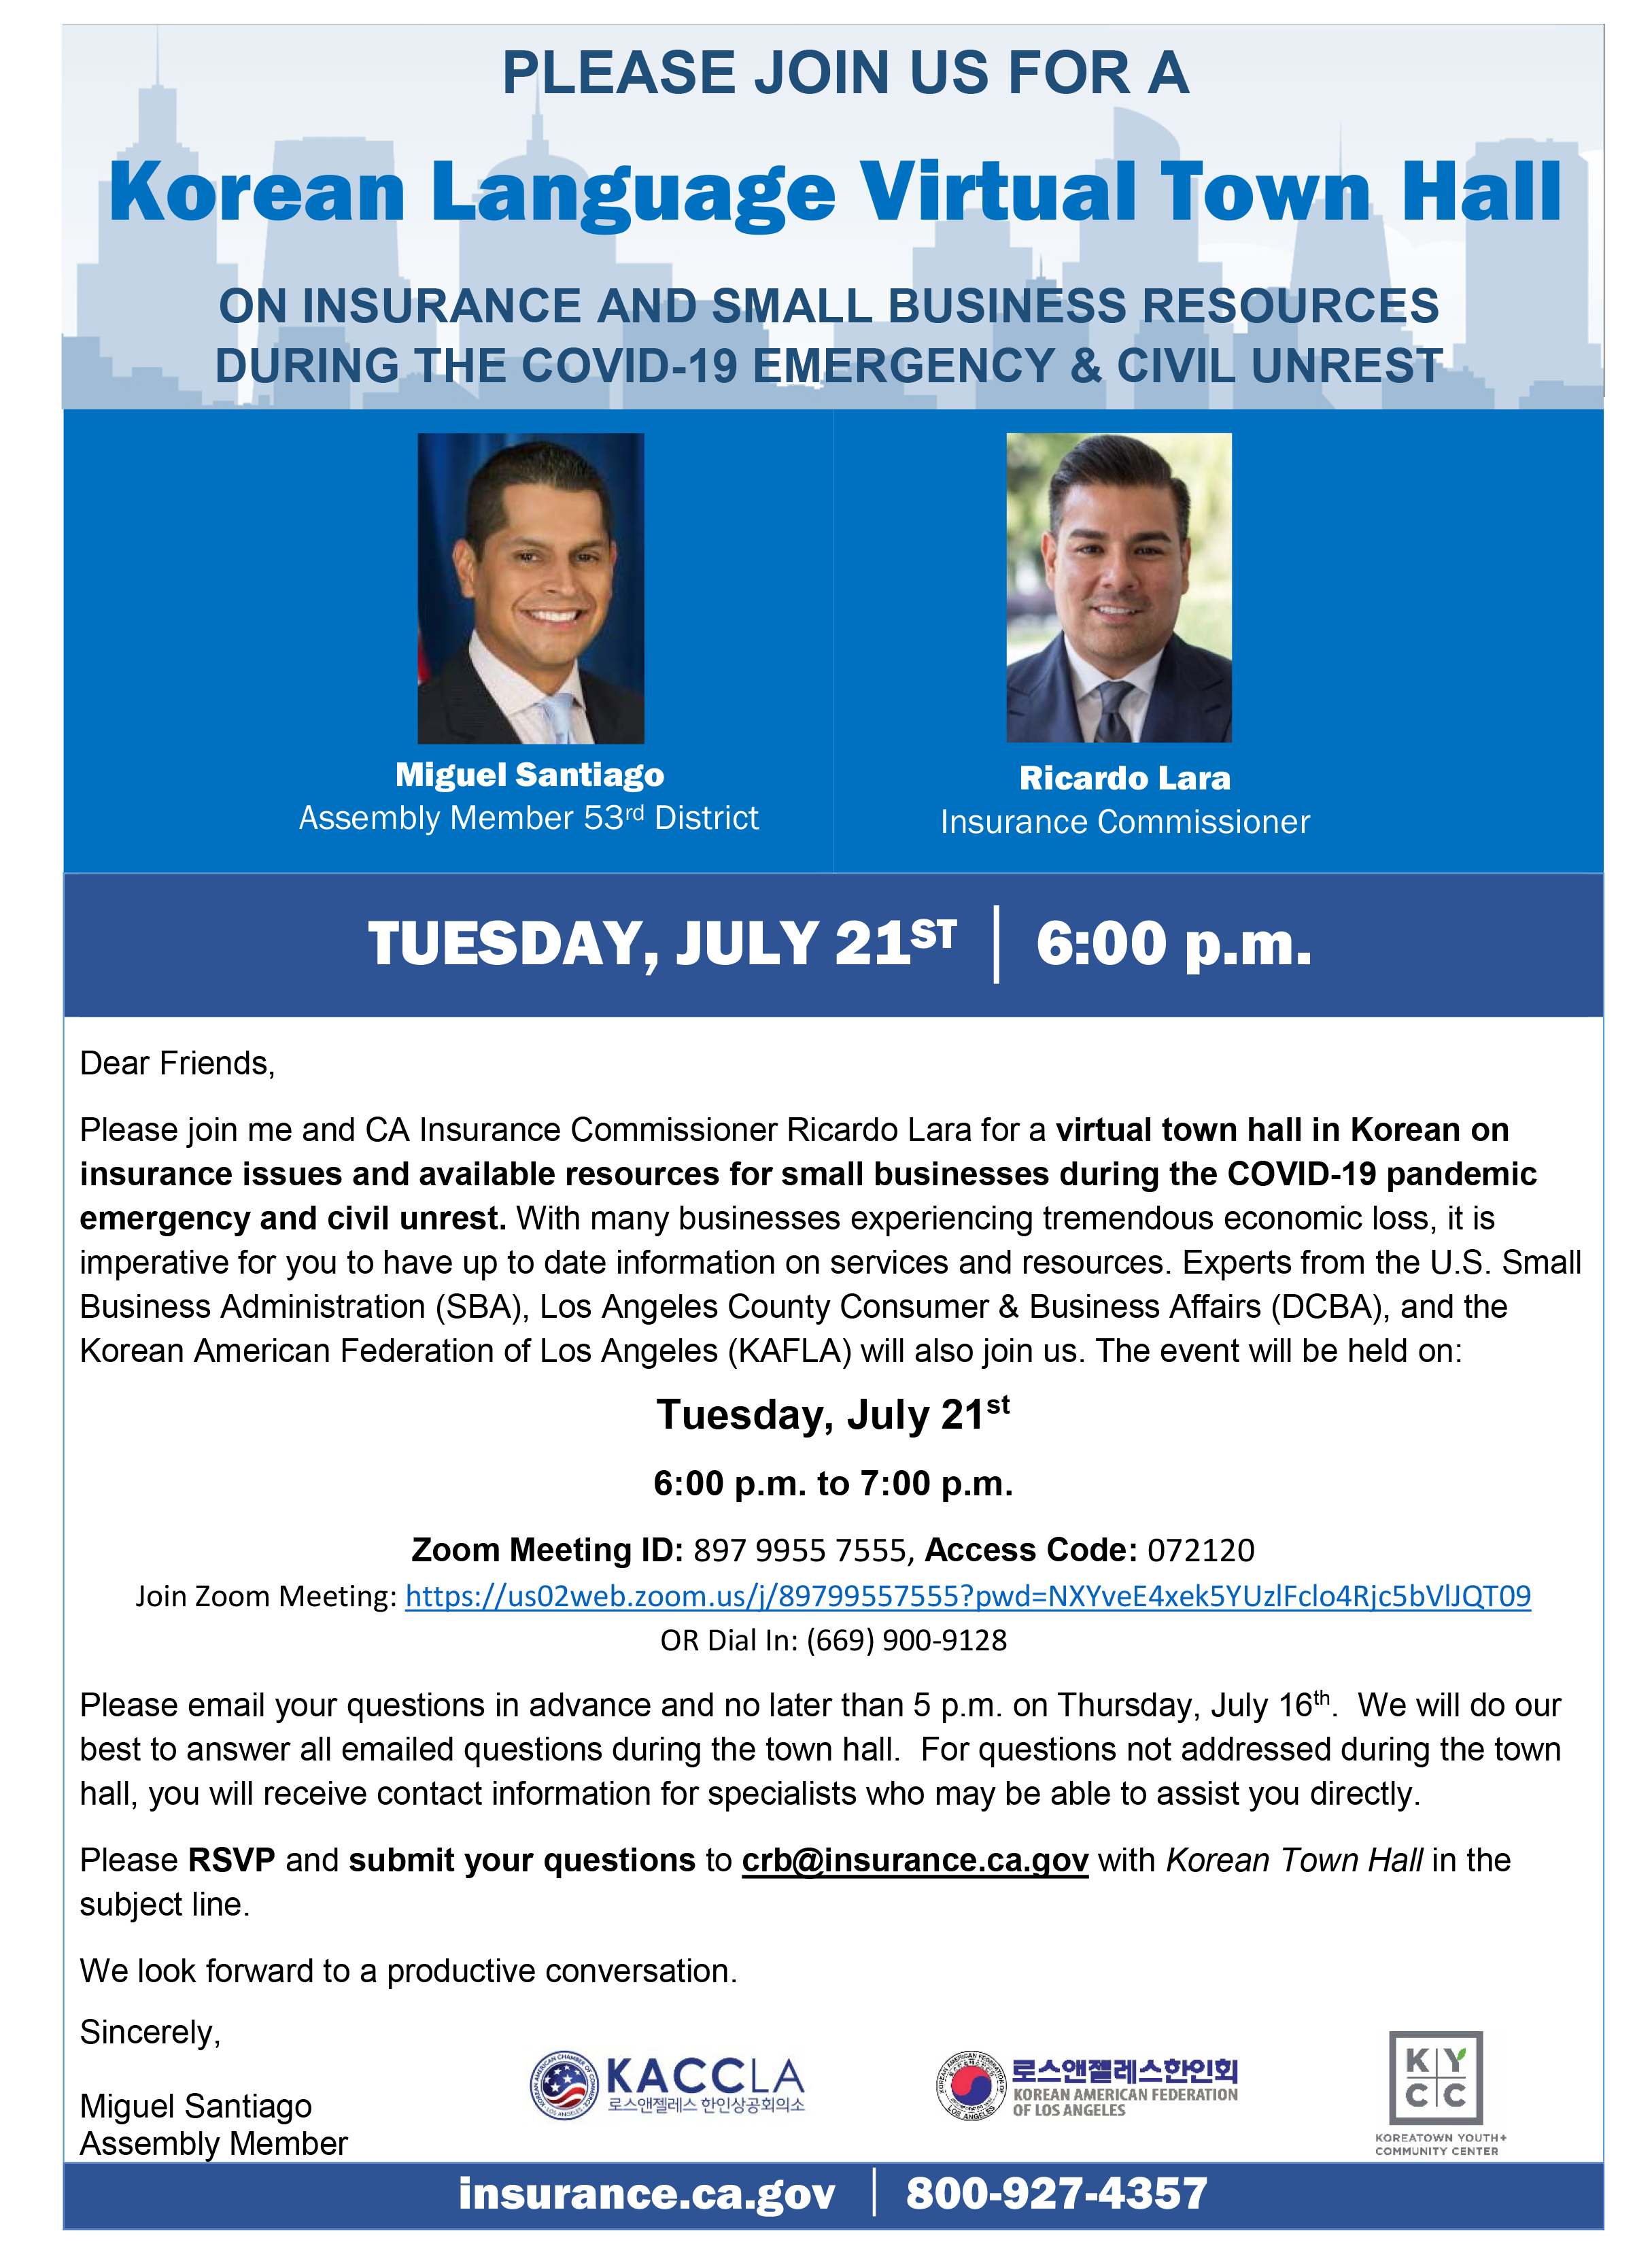 Tuesday, July 21st, 6:00 p.m. to 7:00 p.m., Zoom Meeting ID: 897 9955 7555 Access Code: 072120, Join Zoom Meeting: https://us02web.zoom.us/j/89799557555?pwd=NXYveE4xek5YUzlFclo4Rjc5bVlJQT09